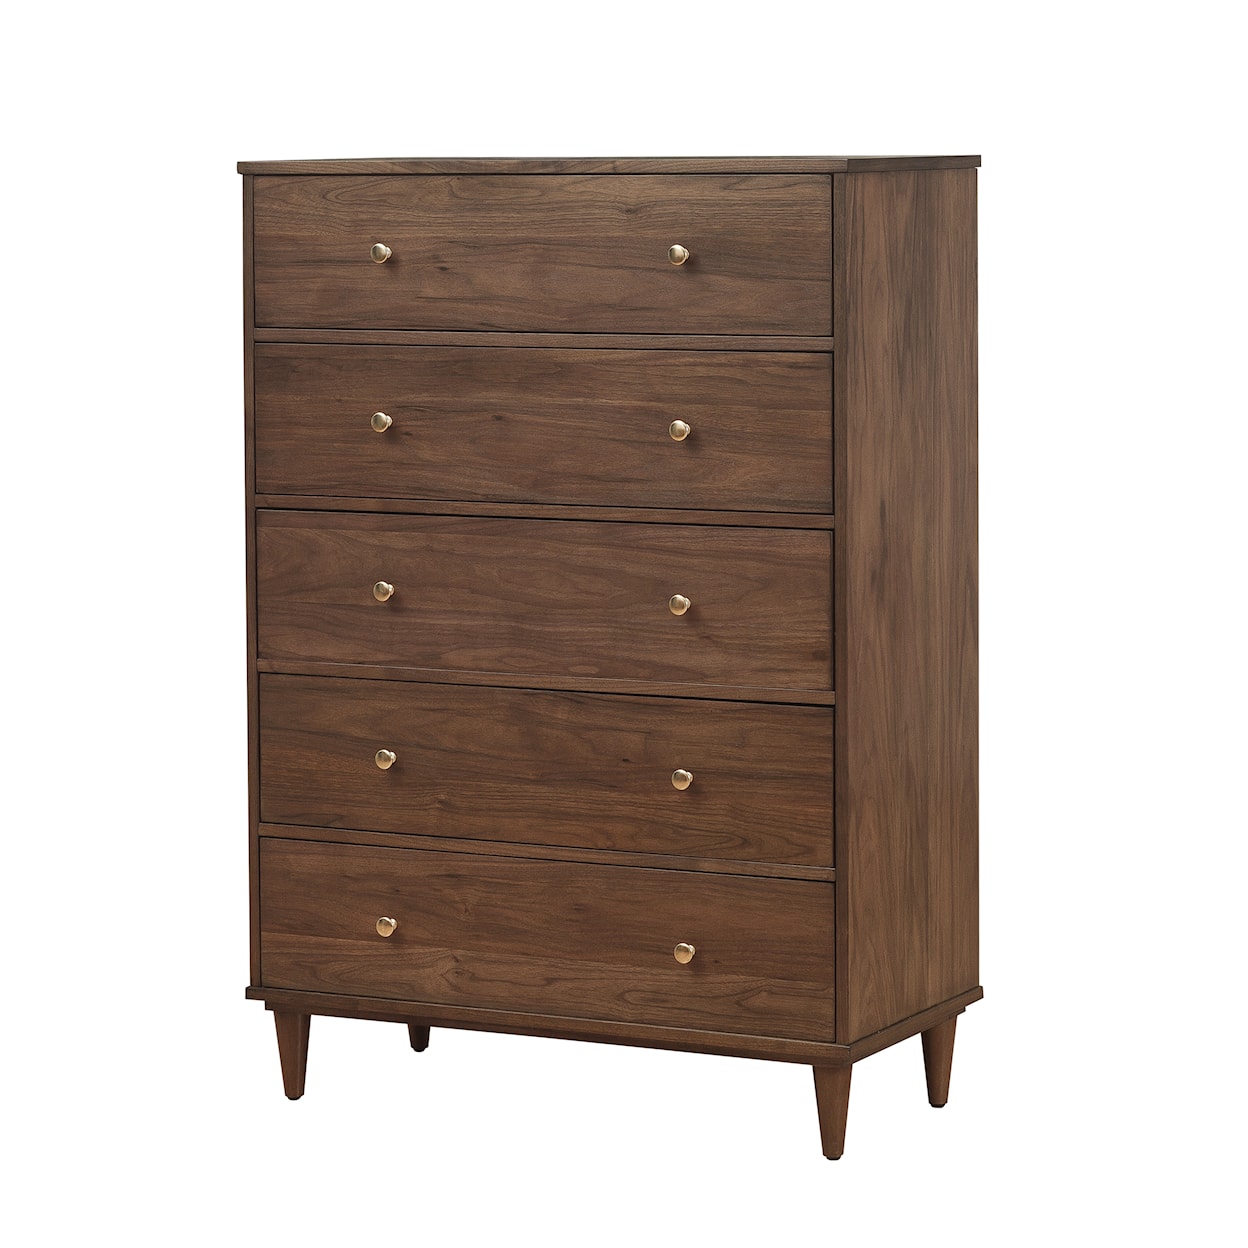 Accentrics Home Accents Dressers & Chests